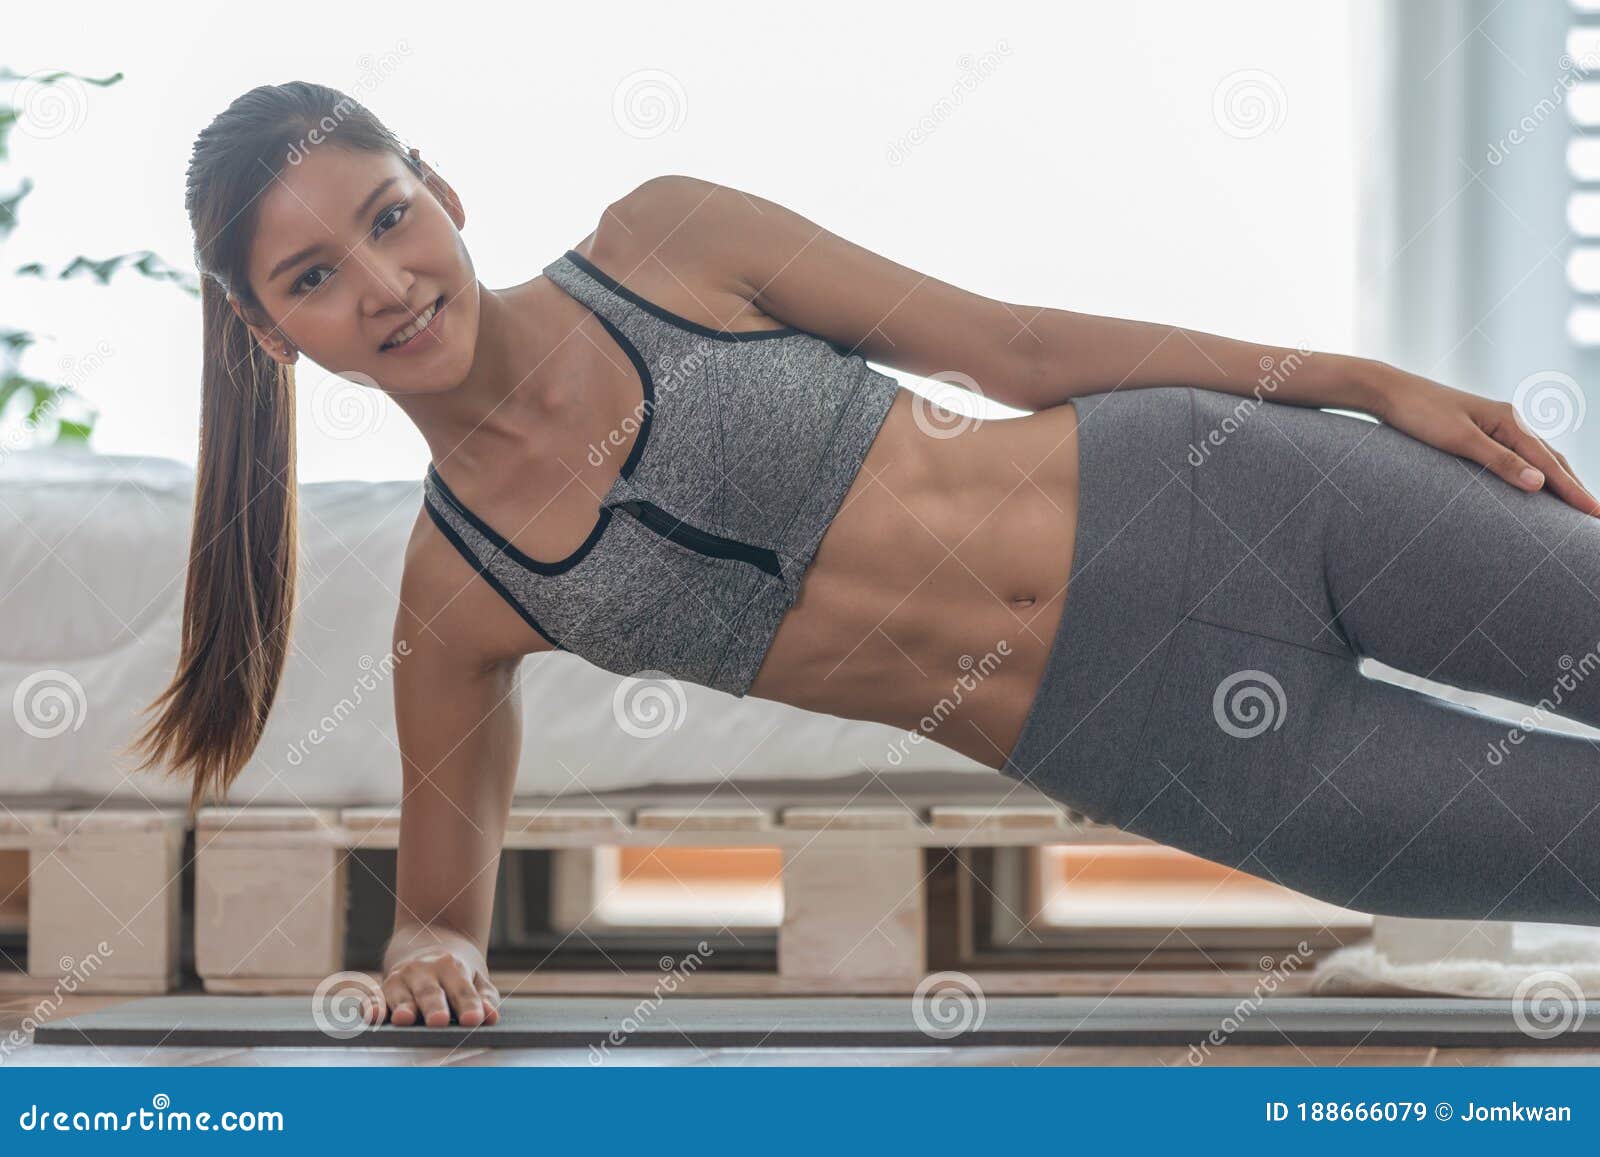 Athletic Healthy Asian Woman In Sportswear Workout Excercise A